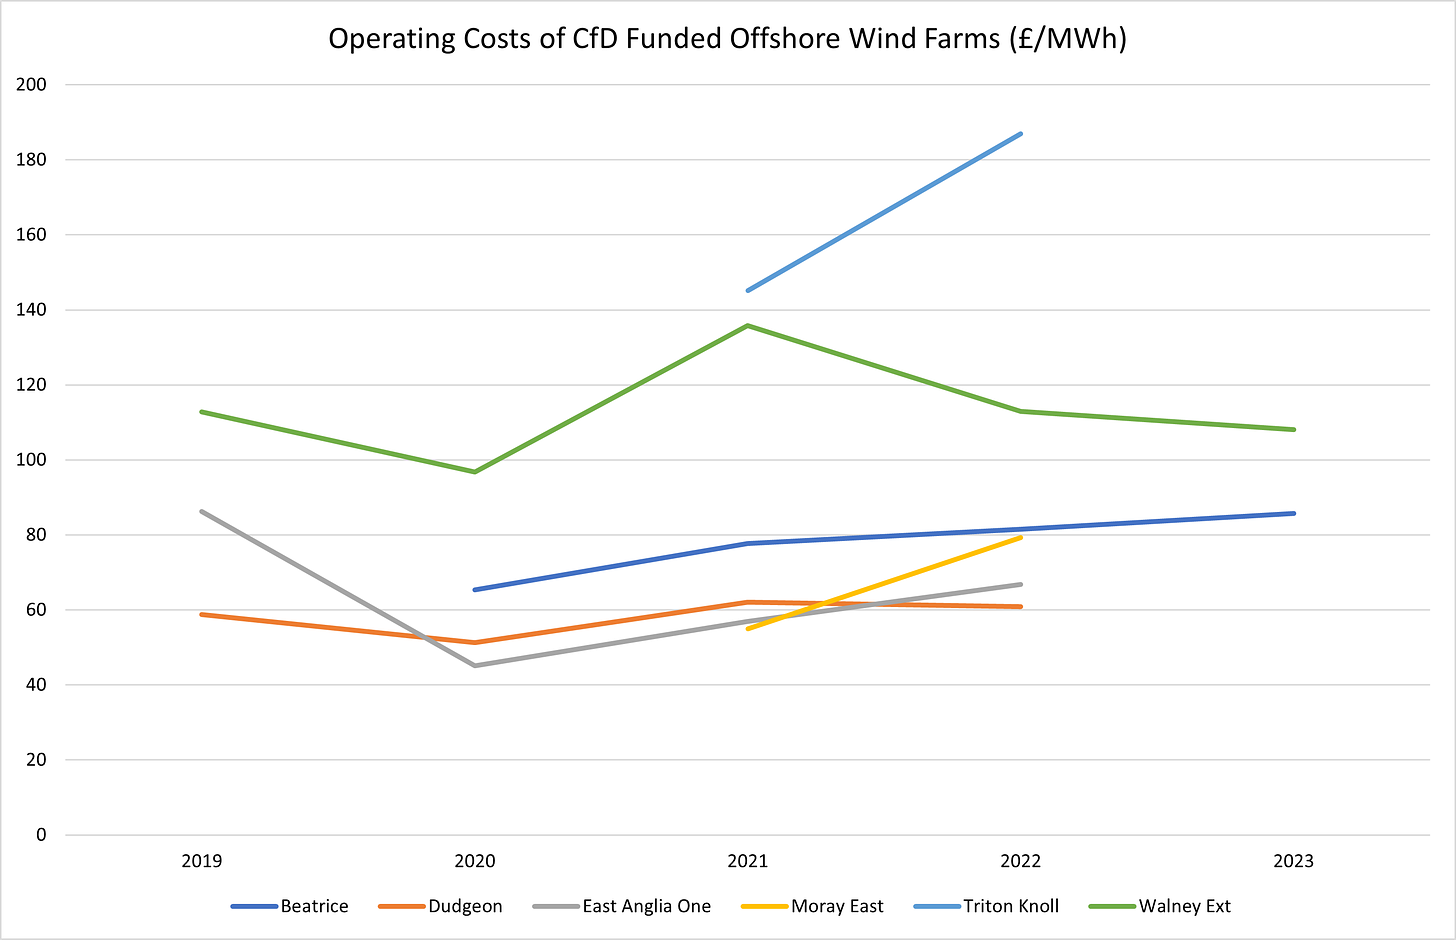 Figure 4 - Operating Costs of CfD Funded Offshore Windfarms (£ per MWh)